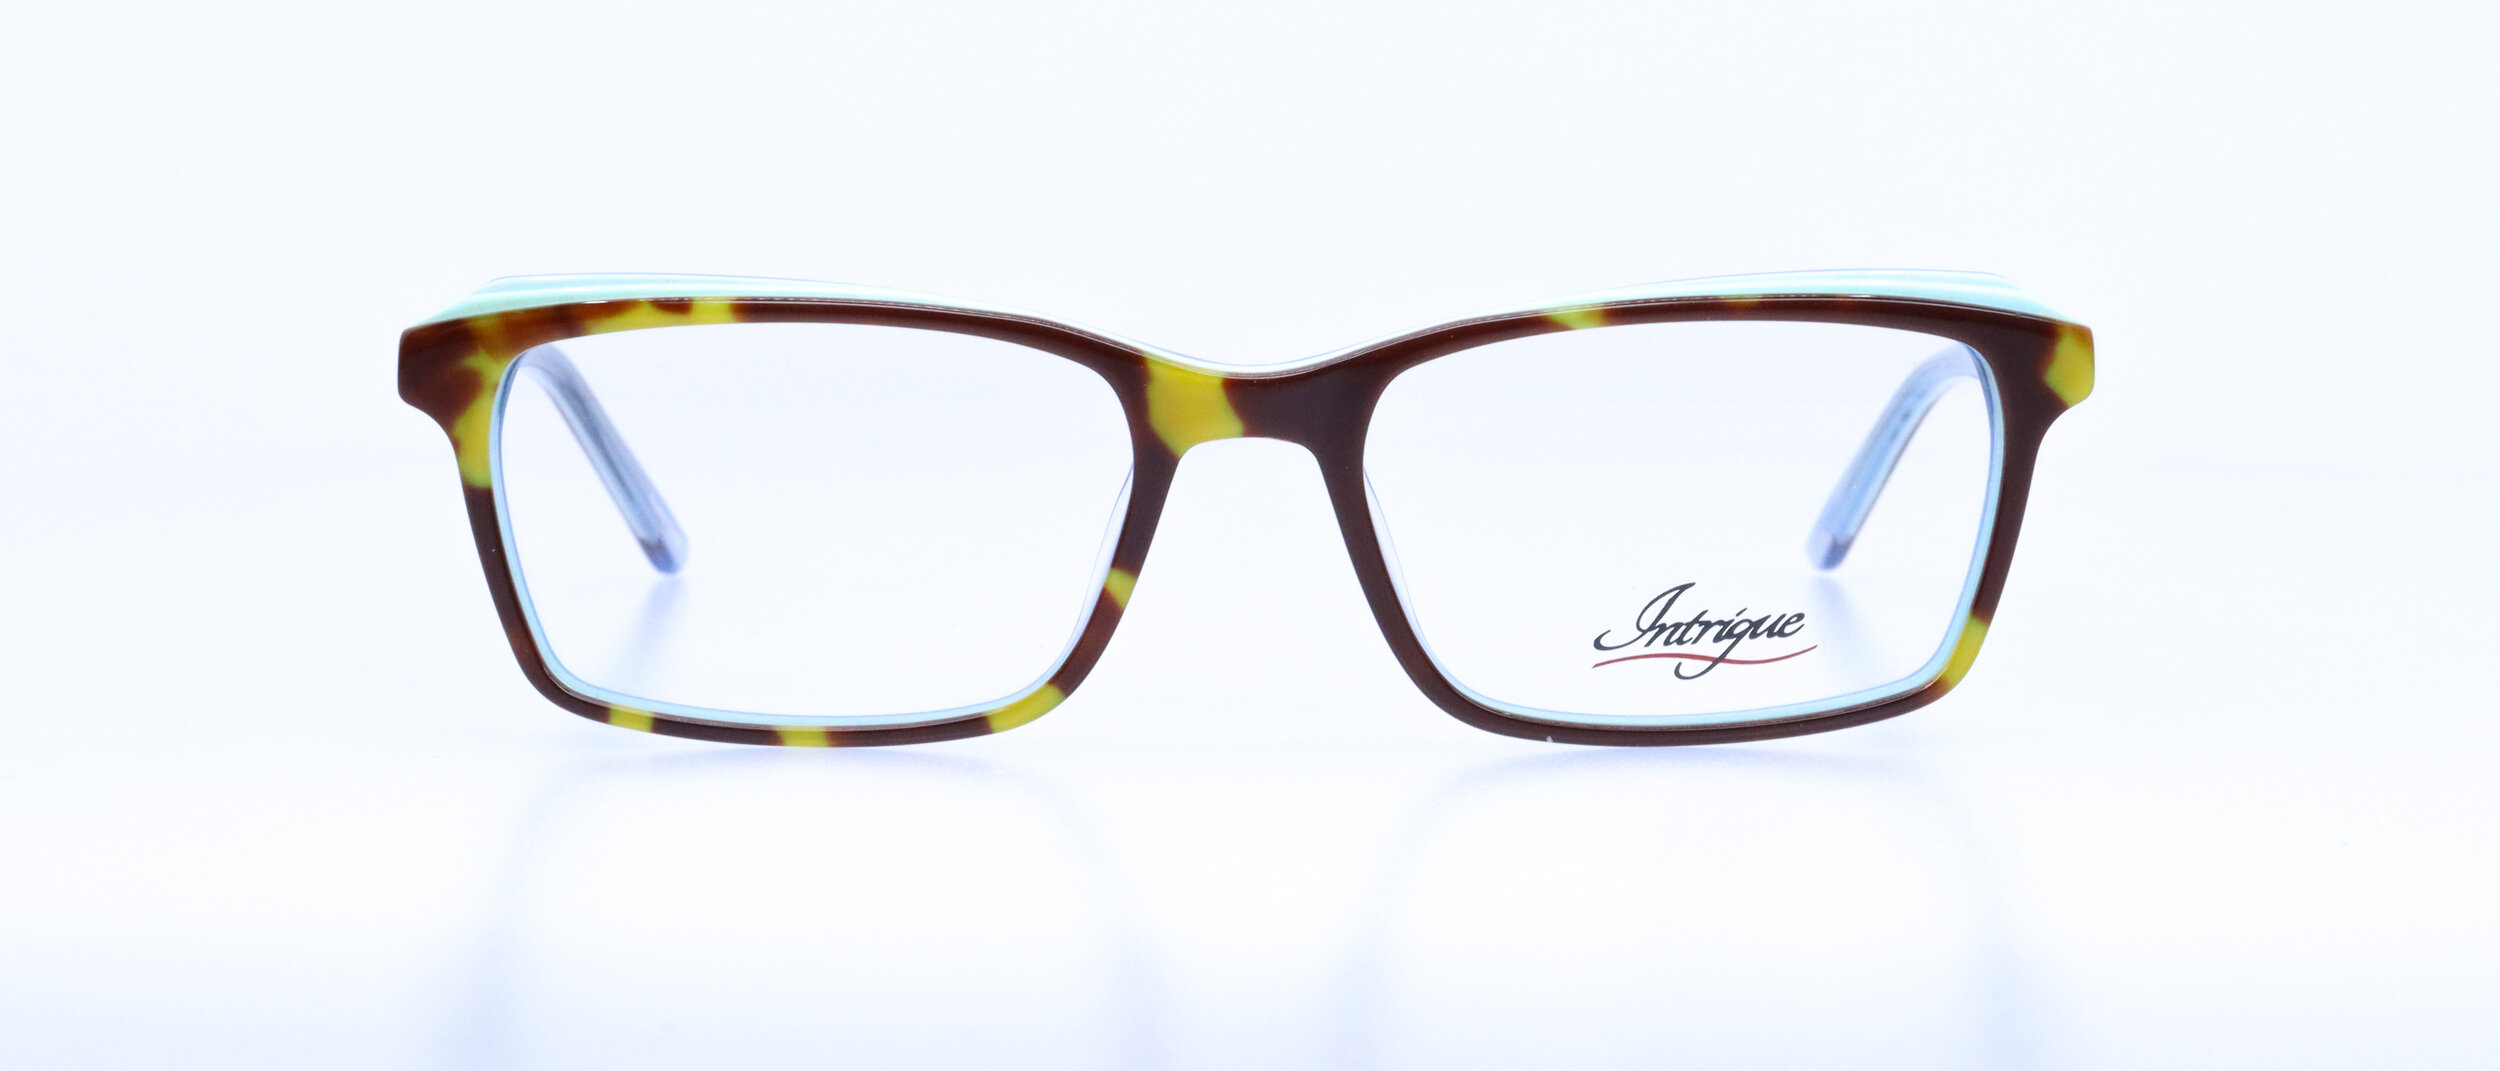  INT200: 53-17-140, Available in Black/Yellow or Tortoise/Aqua 